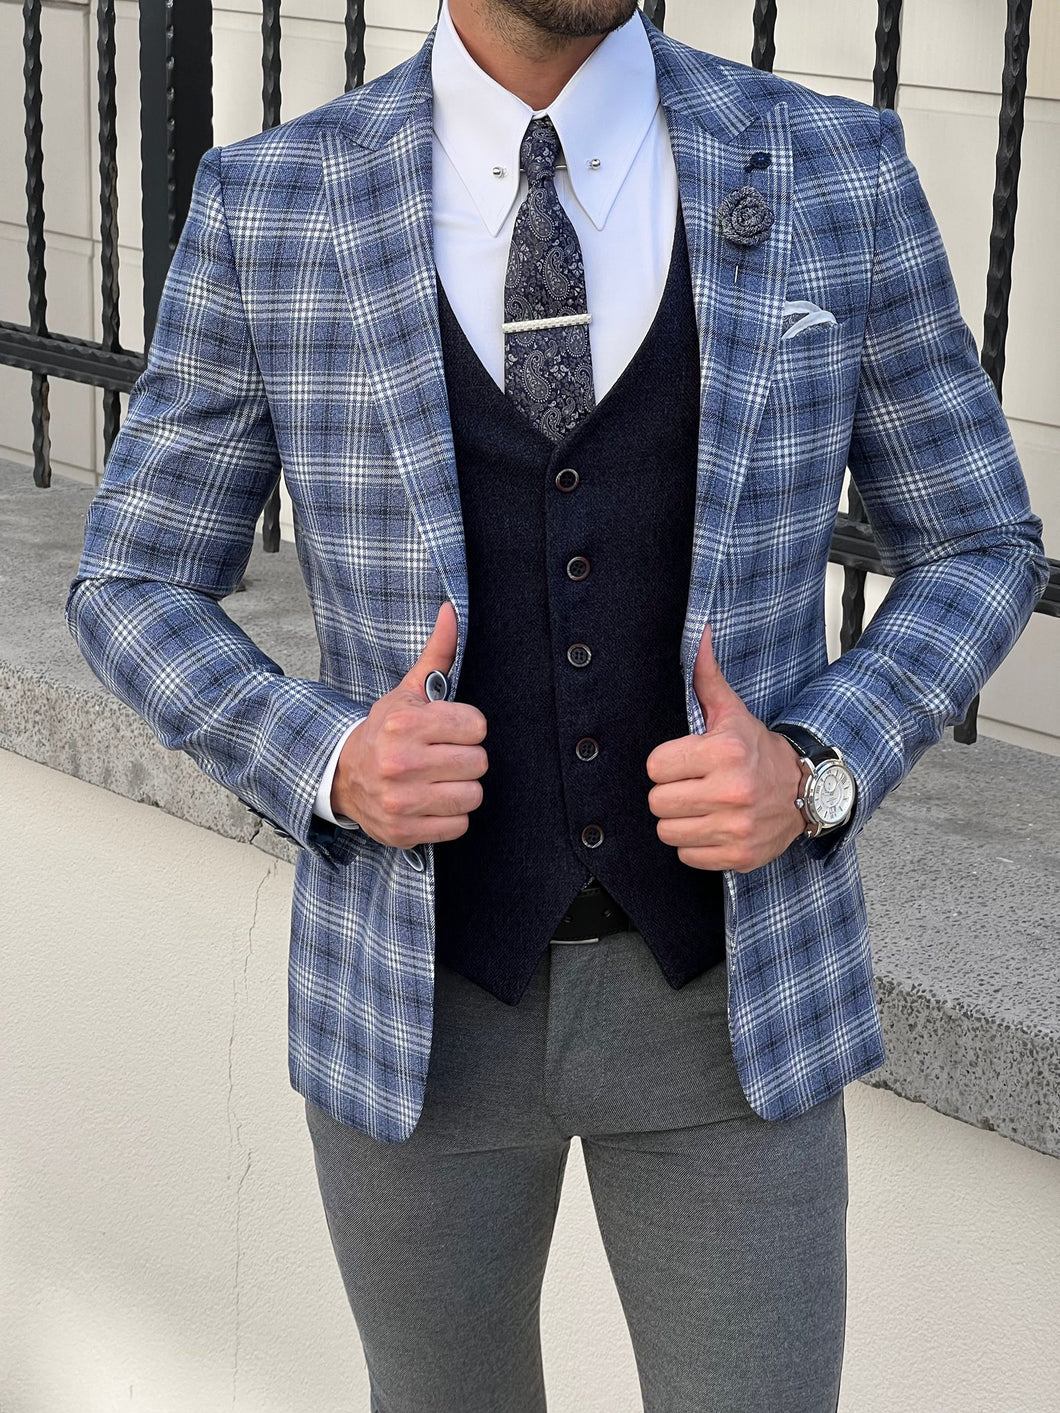 Efe Slim Fit Patterned Pointed Collared Light Navy Blue Plaid Suit